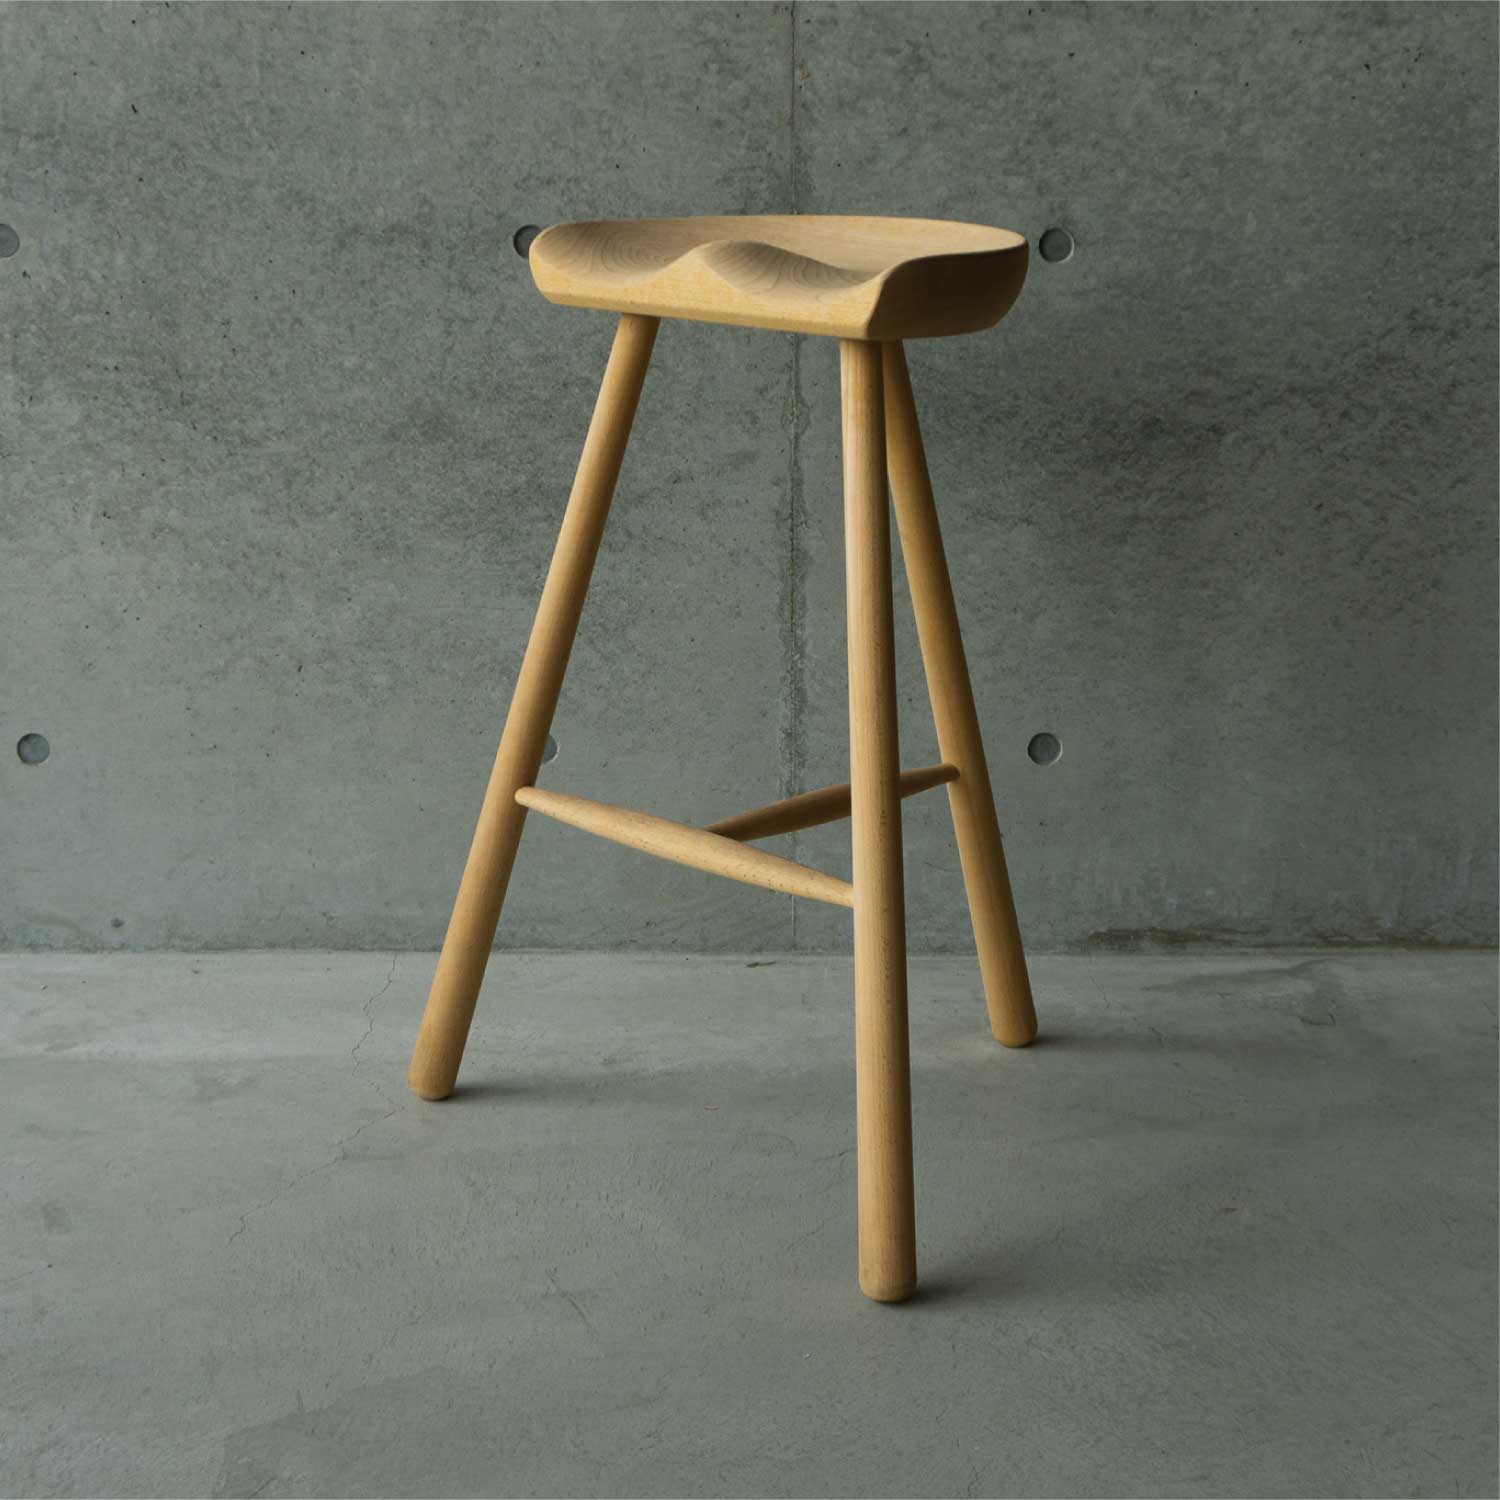 Y's DAY Online Shop / SHOEMAKER CHAIR